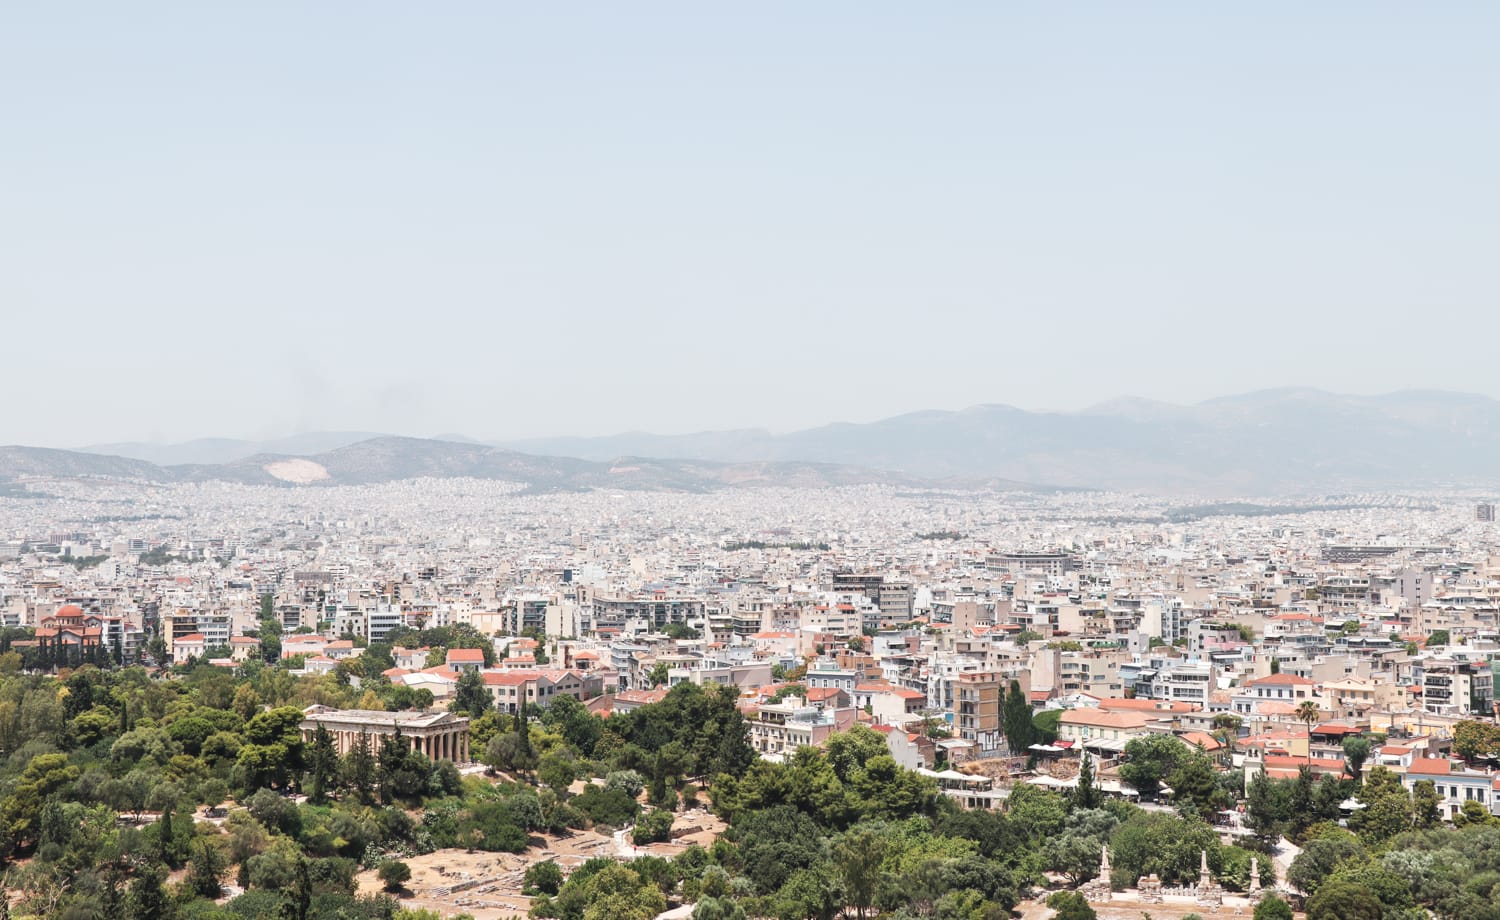 Areopagus Hill in Athen - Griechenland